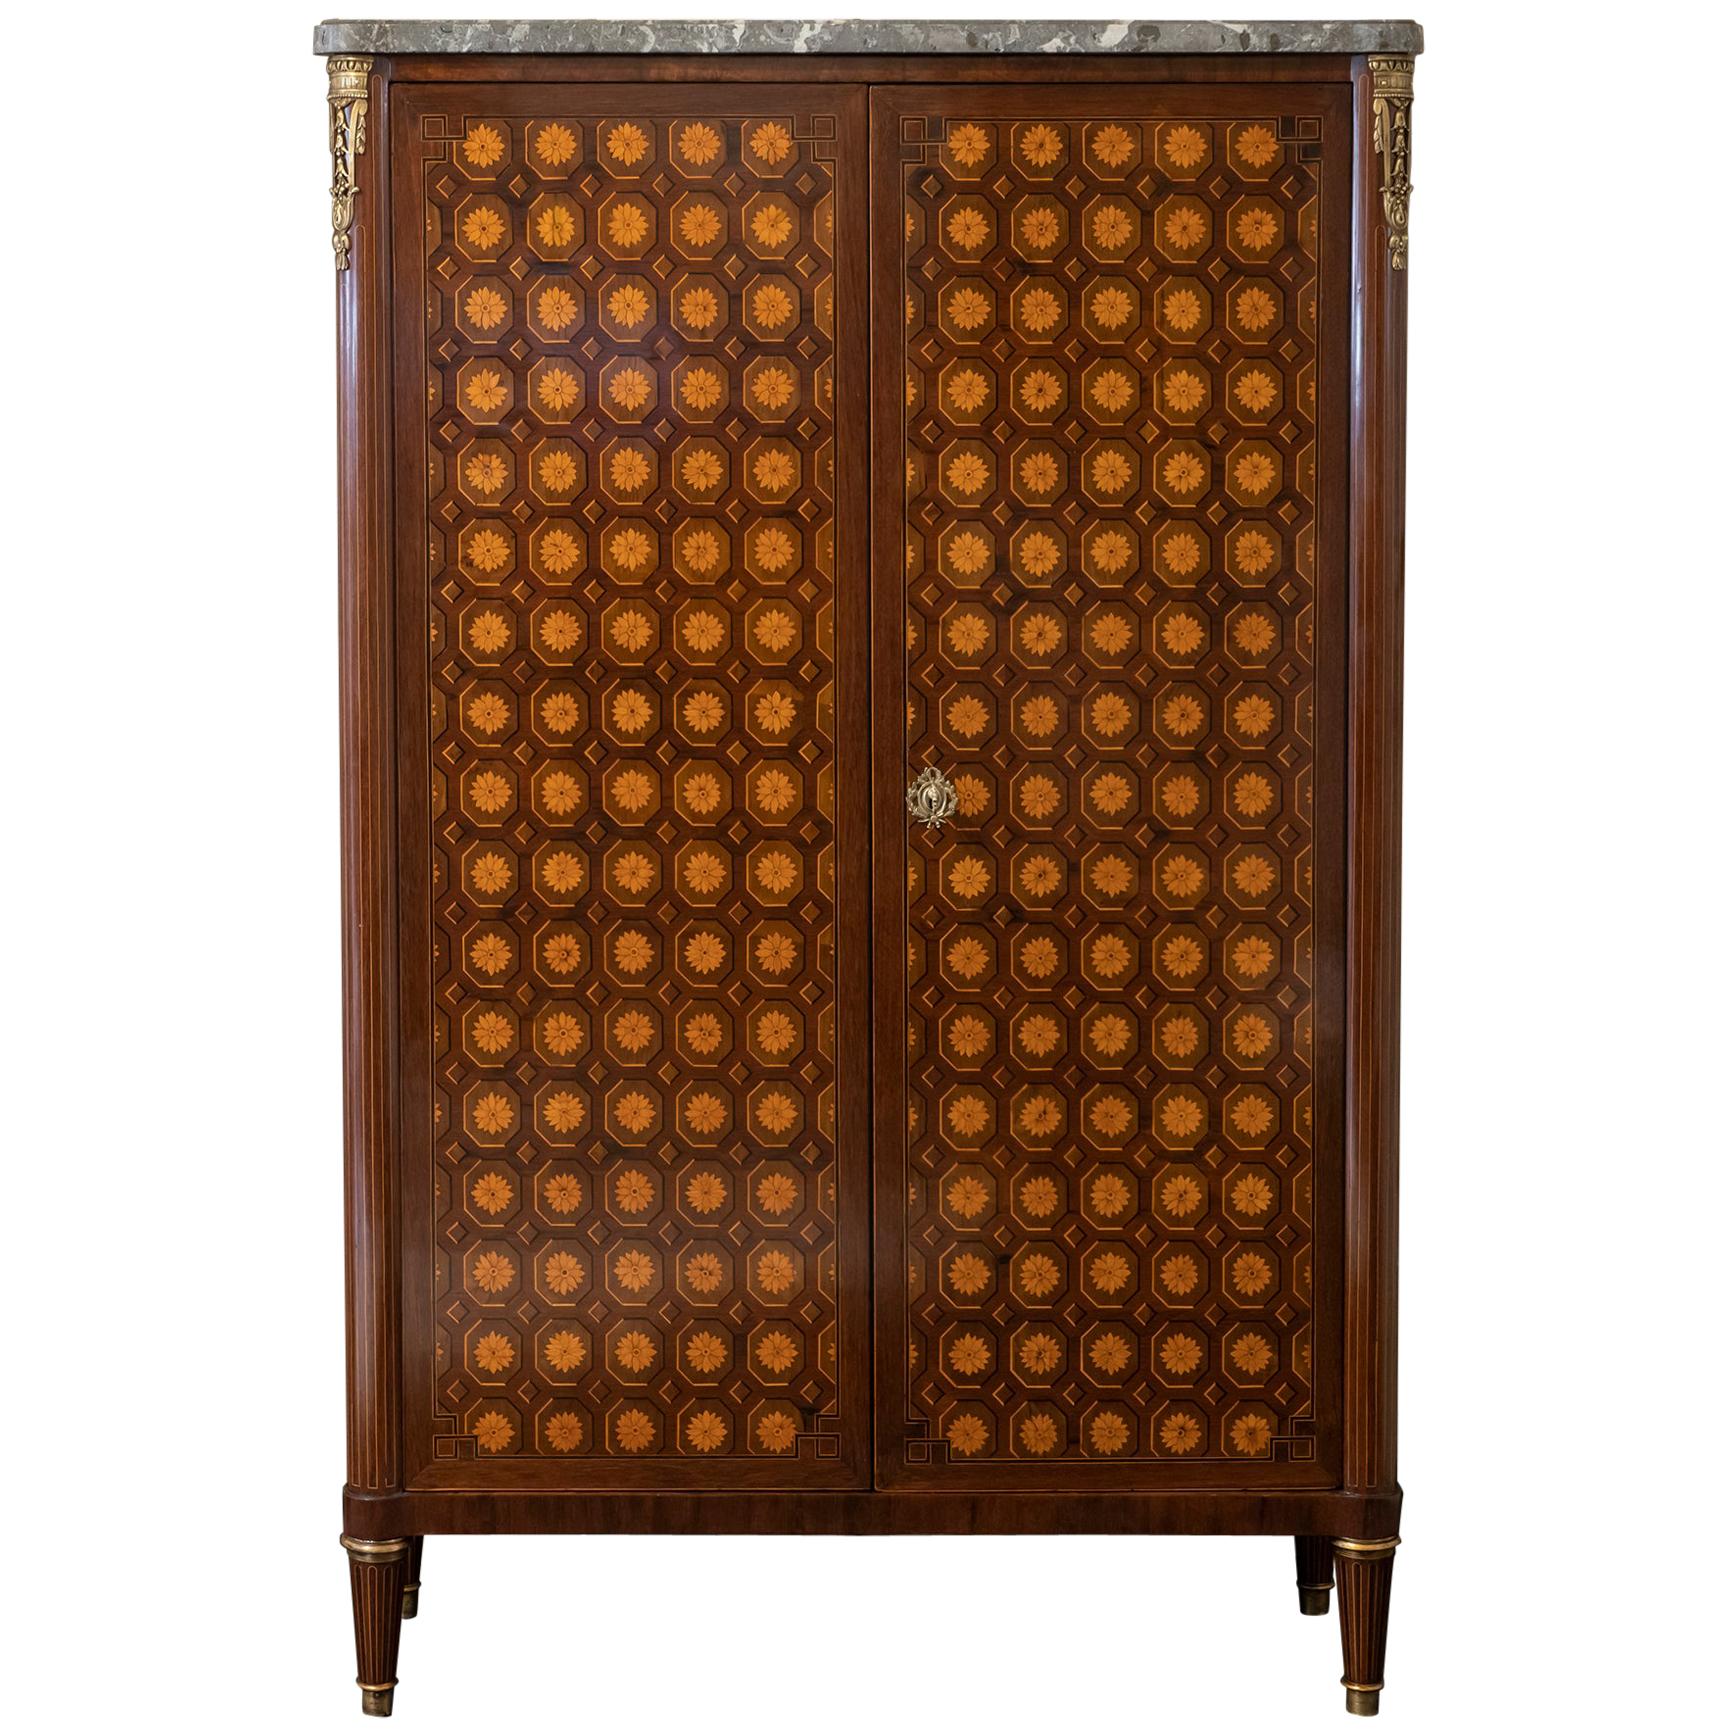 Early 19th Century French Marquetry Tall Cabinet, Marble Top, Brass Details